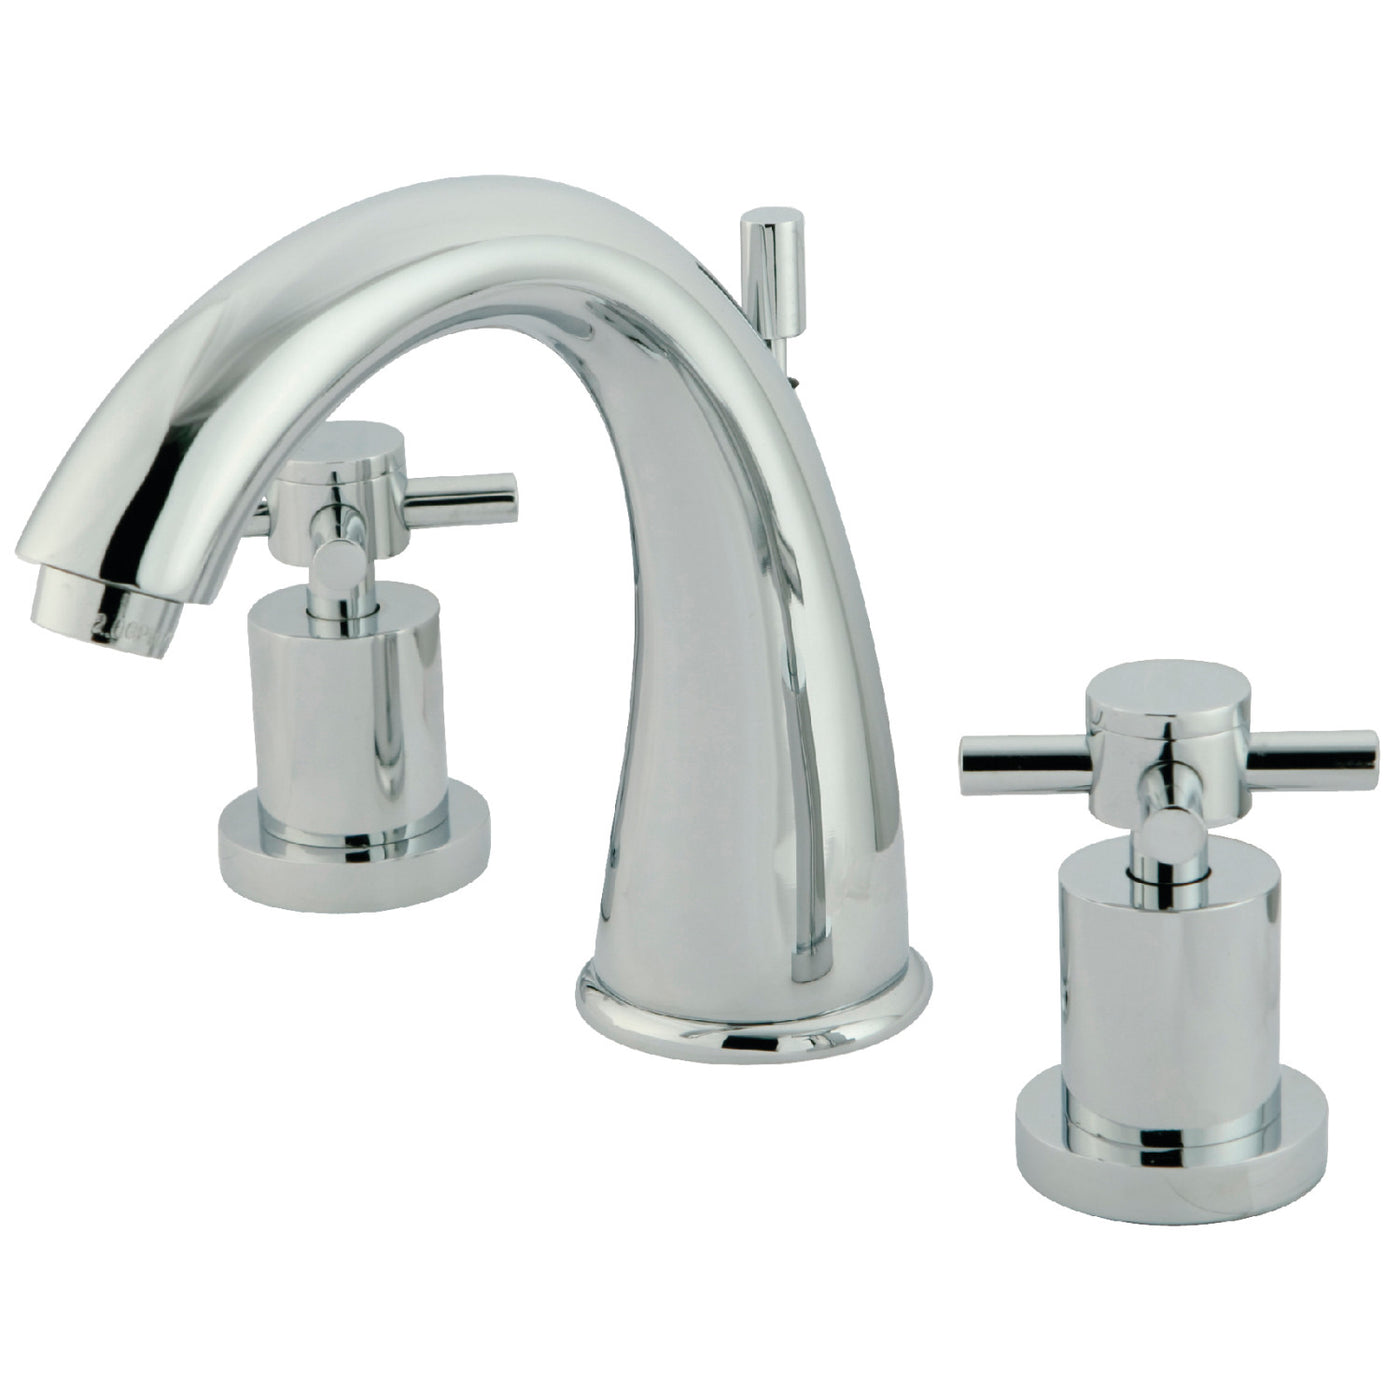 Elements of Design ES2961DX Widespread Bathroom Faucet with Brass Pop-Up, Polished Chrome